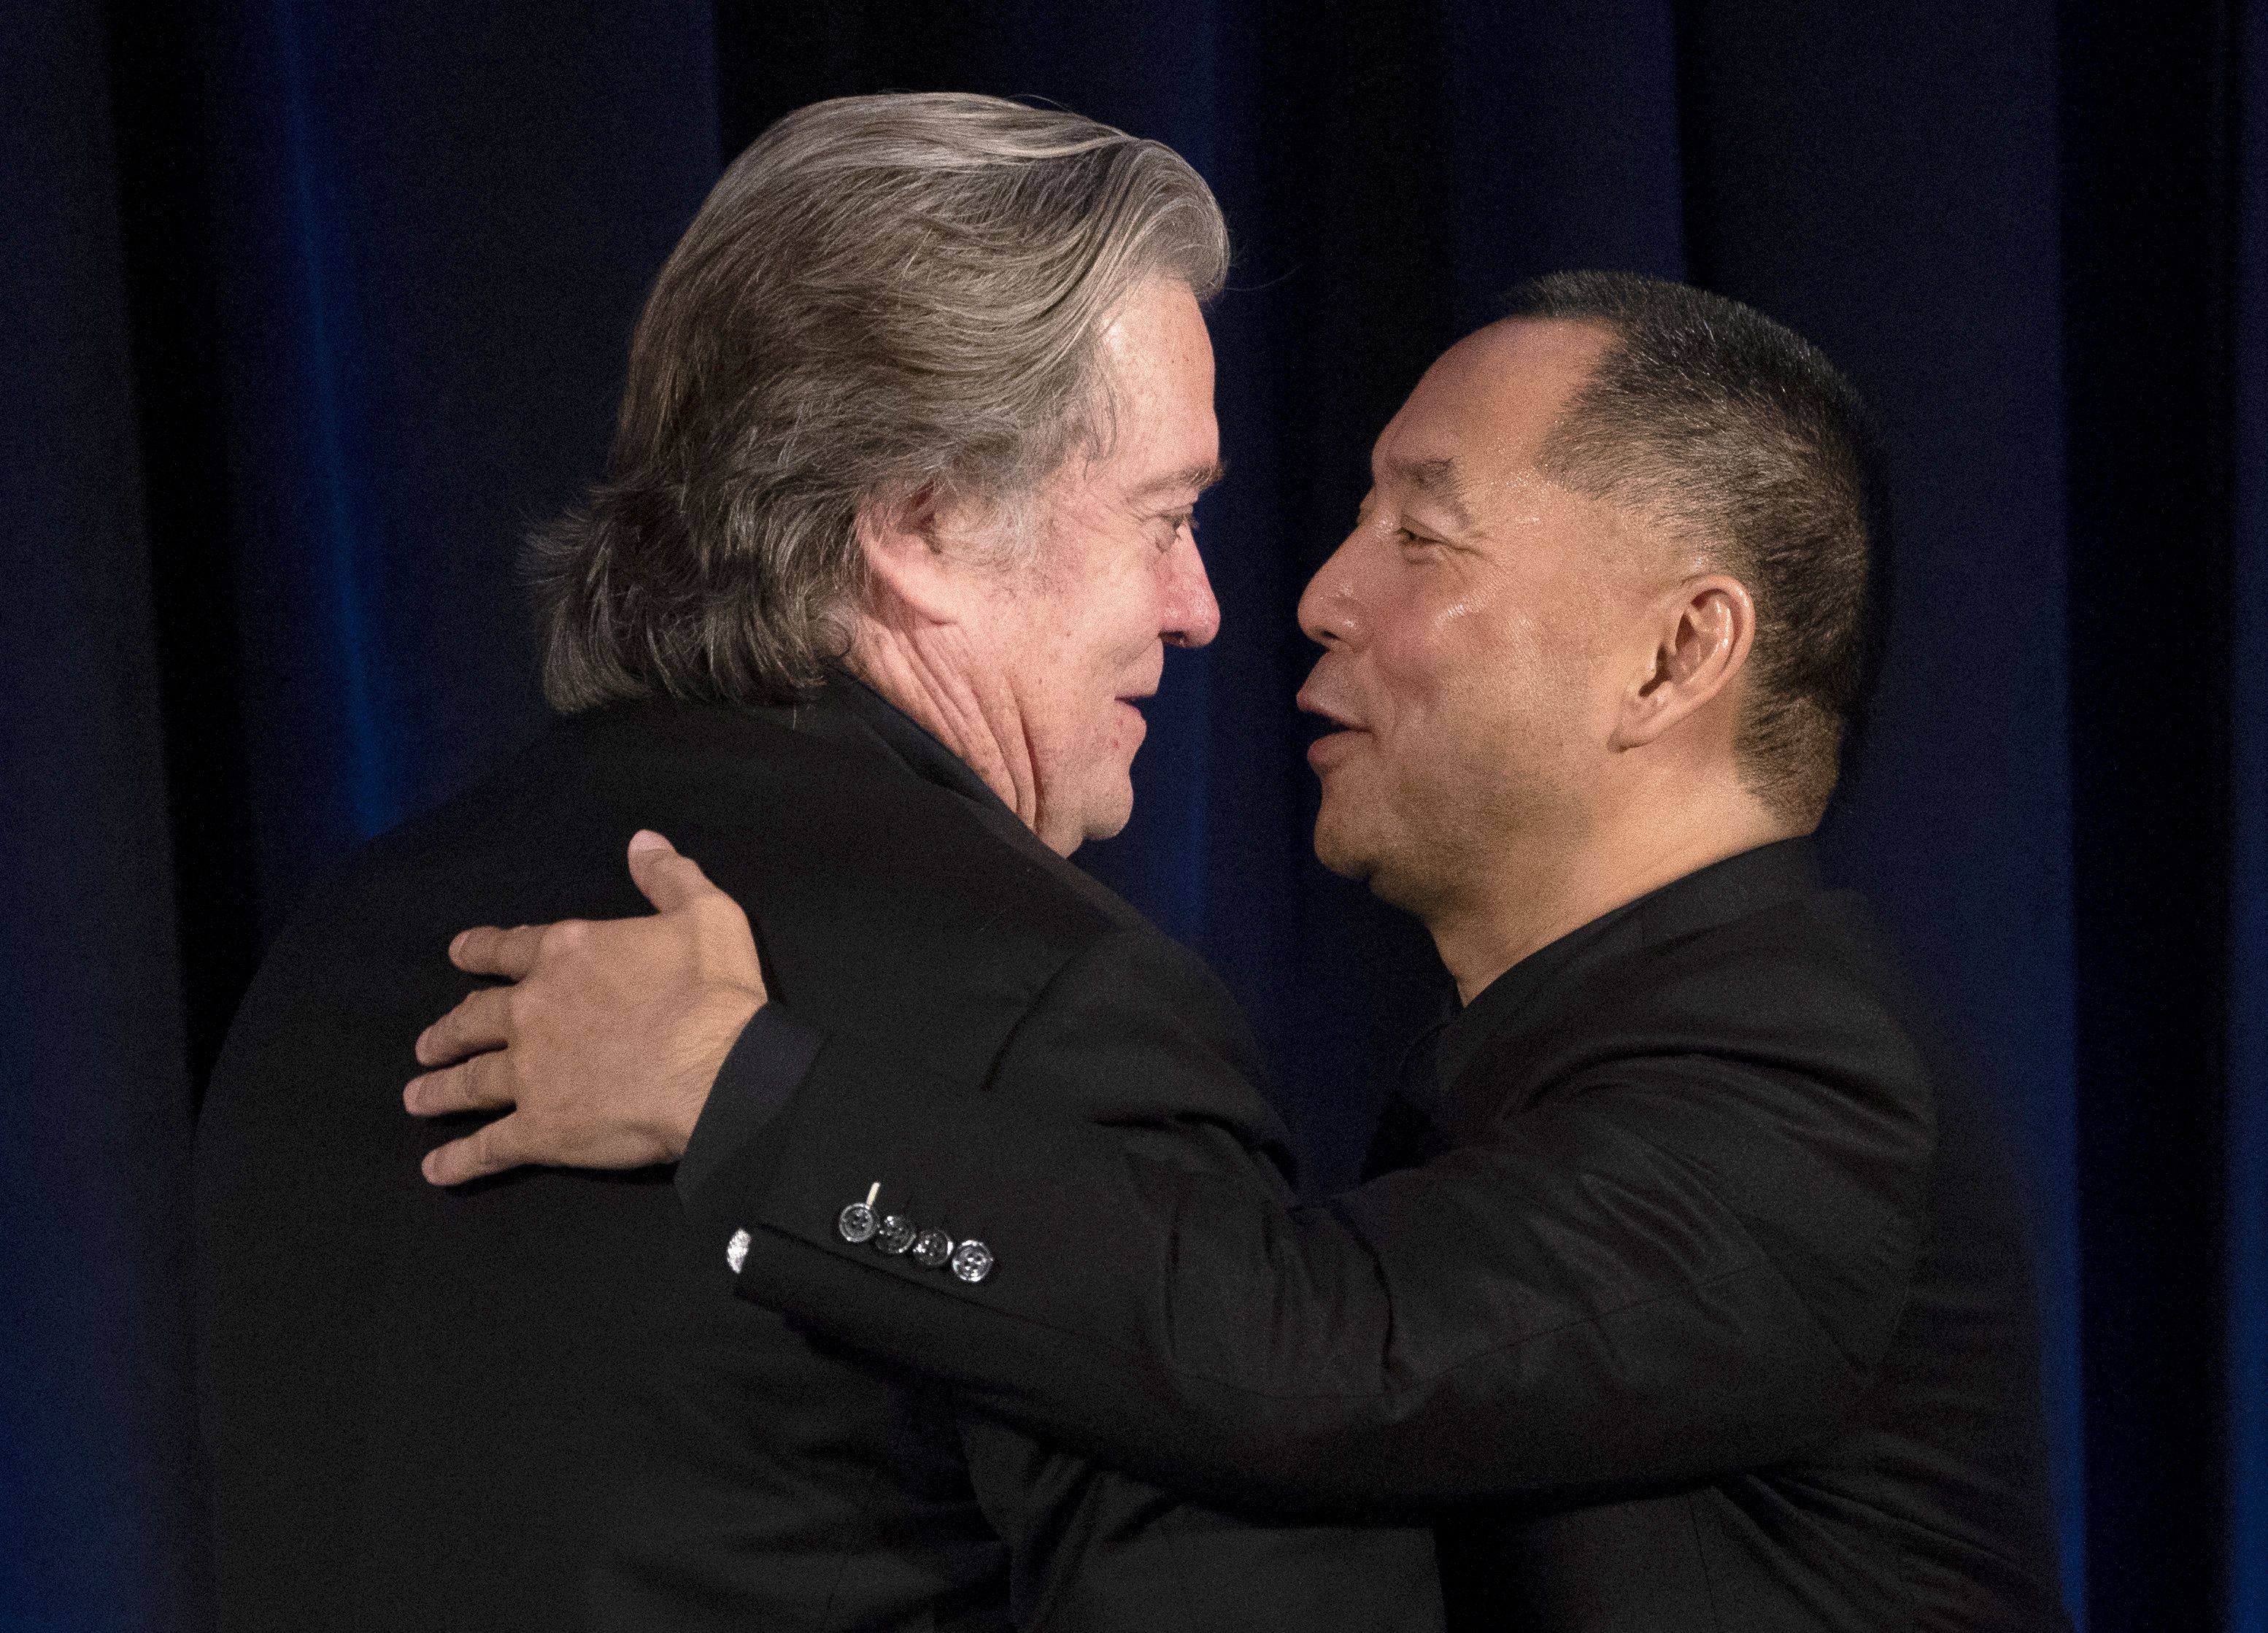 Former White House chief strategist Steve Bannon greets Chinese billionaire Guo Wengui, right, before a news conference in 2018. Photo: AFP